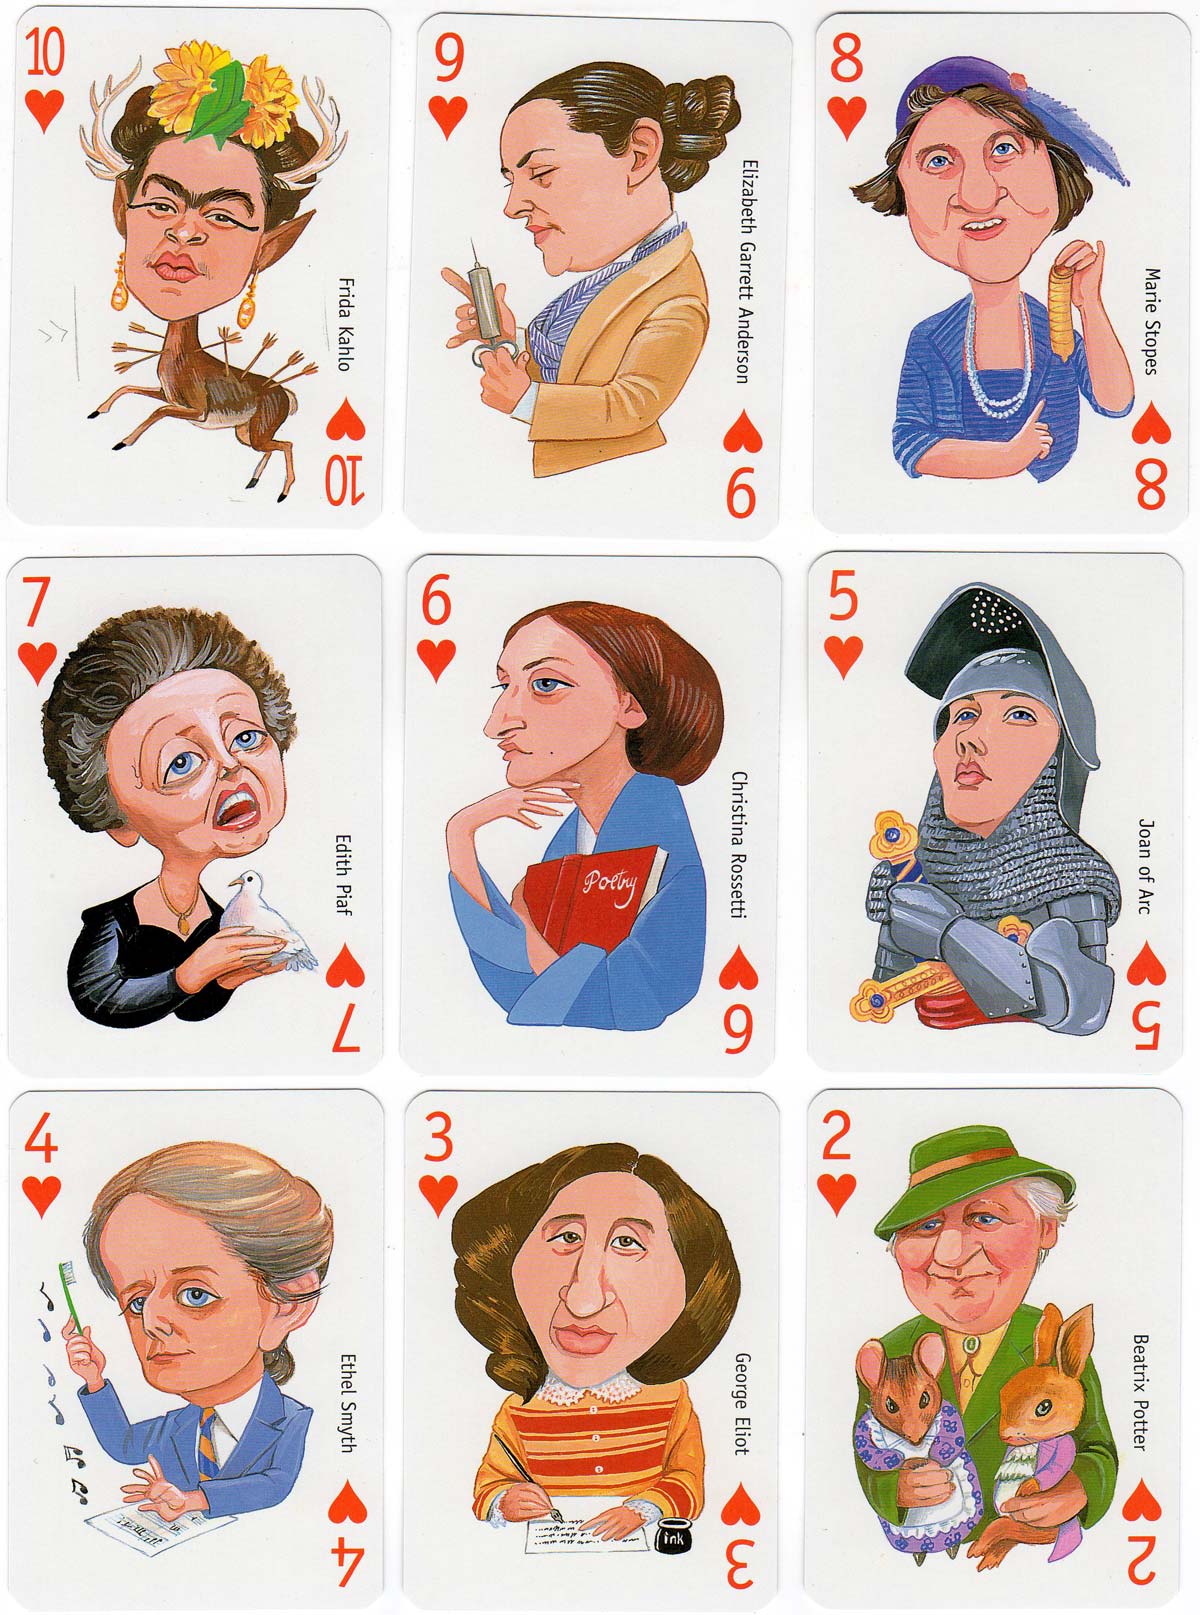 The Woman’s Hour playing cards published by David Westnedge, 1996